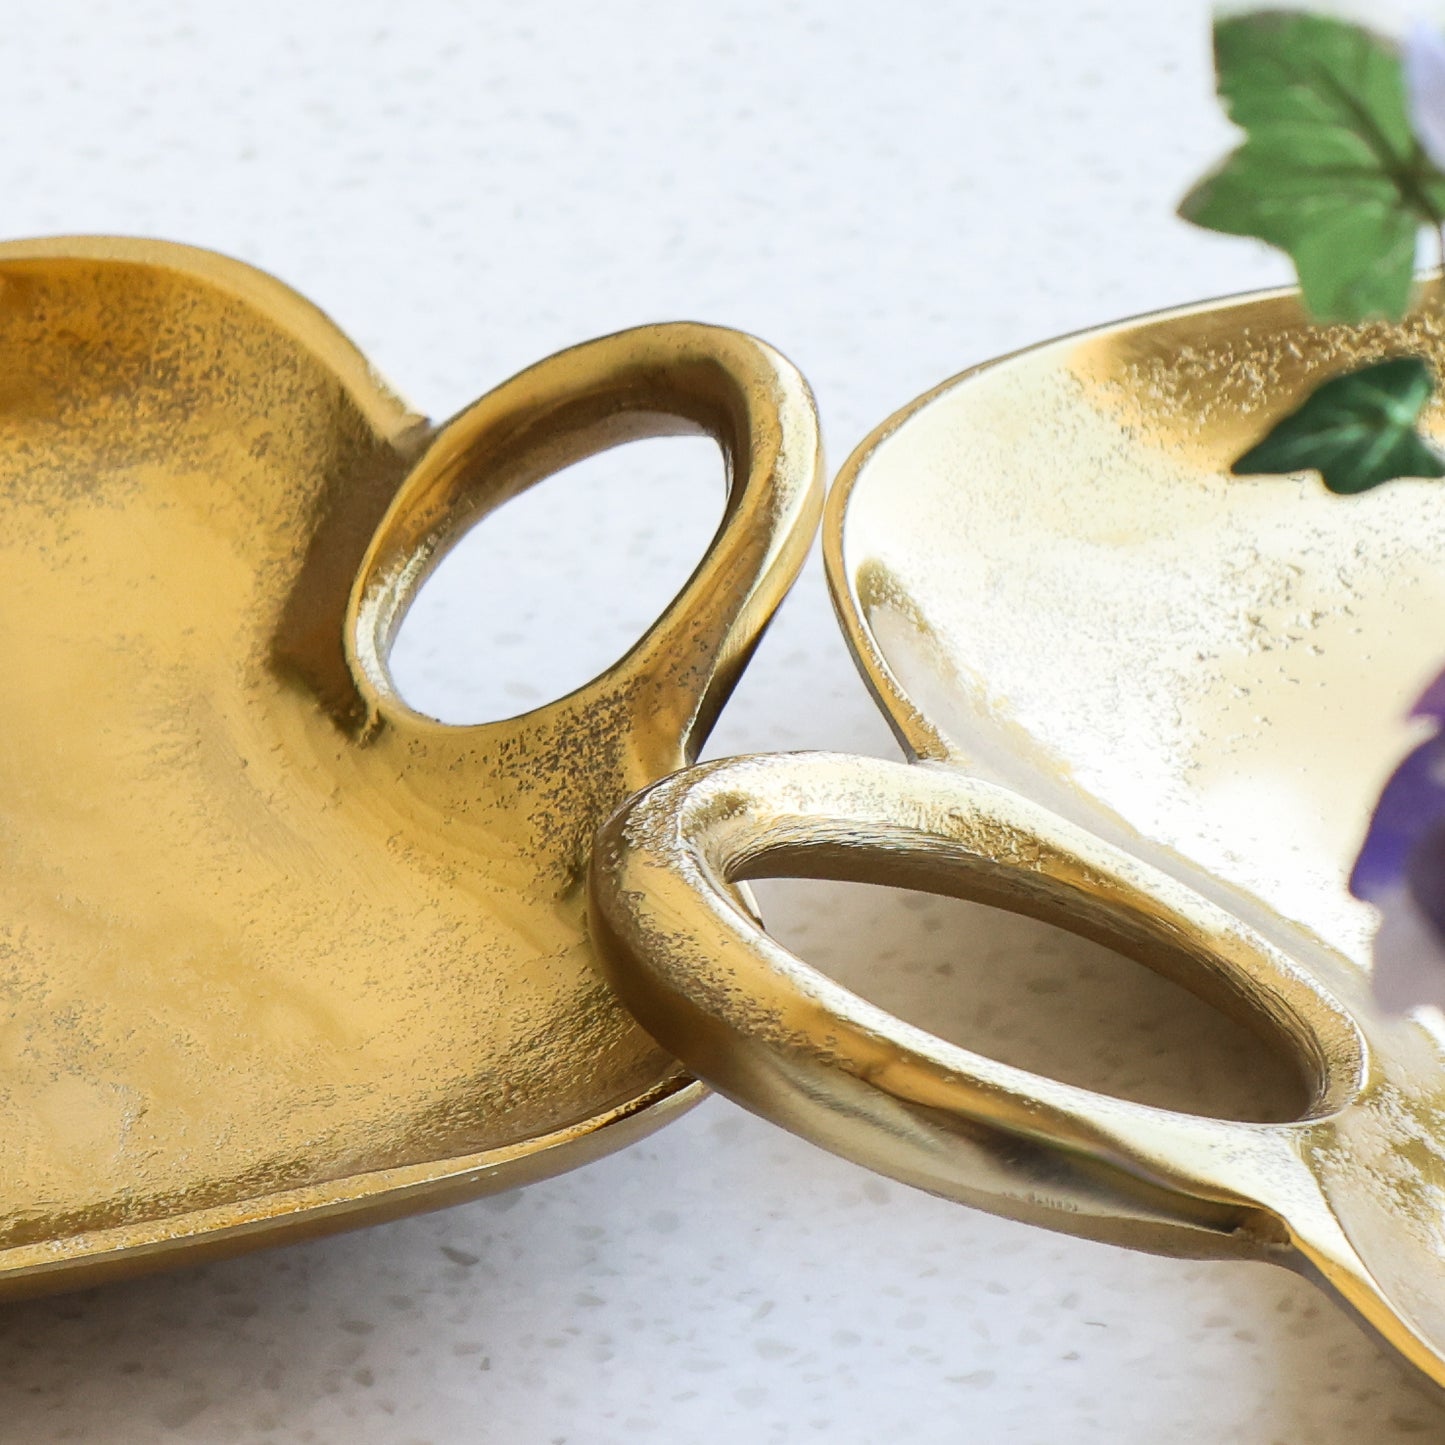 Set of 2 Decorative Gold Tray with Handles